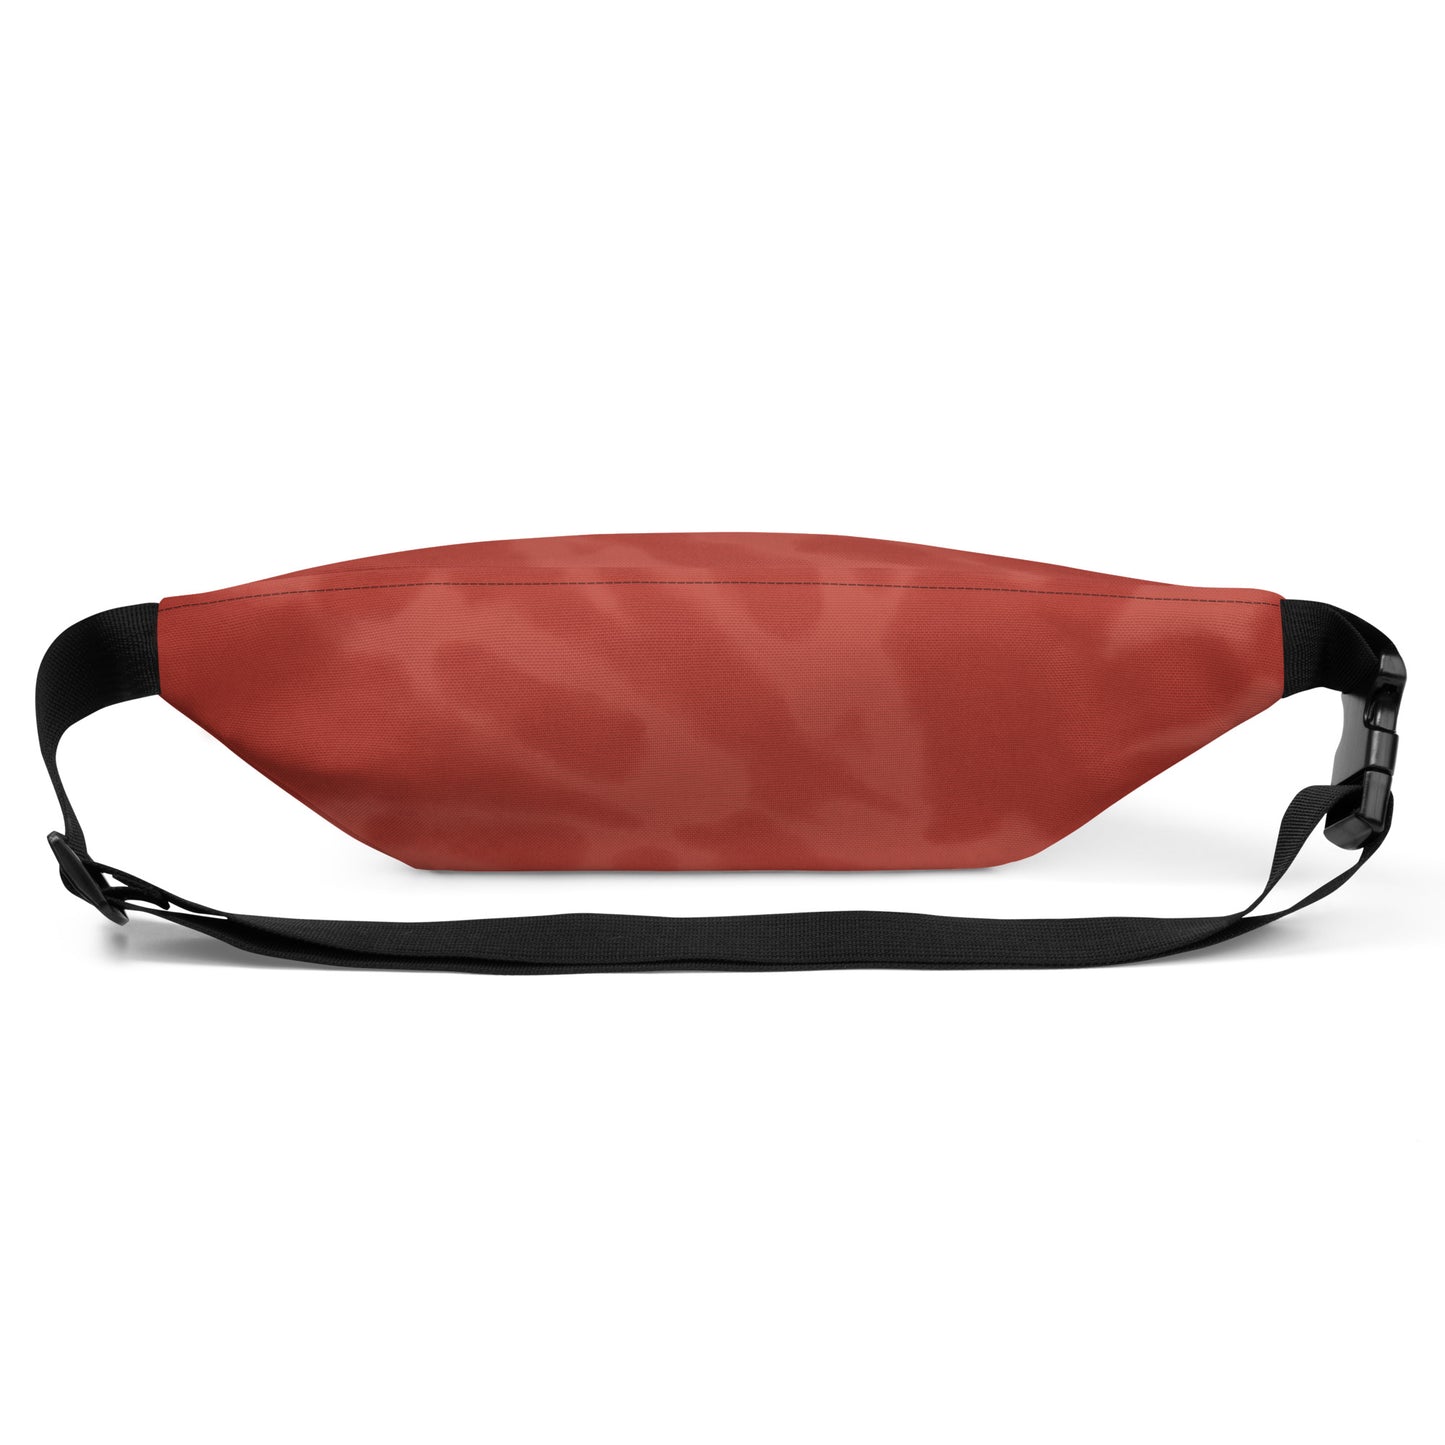 Travel Gift Fanny Pack - Red Tie-Dye • SVO Moscow • YHM Designs - Image 09